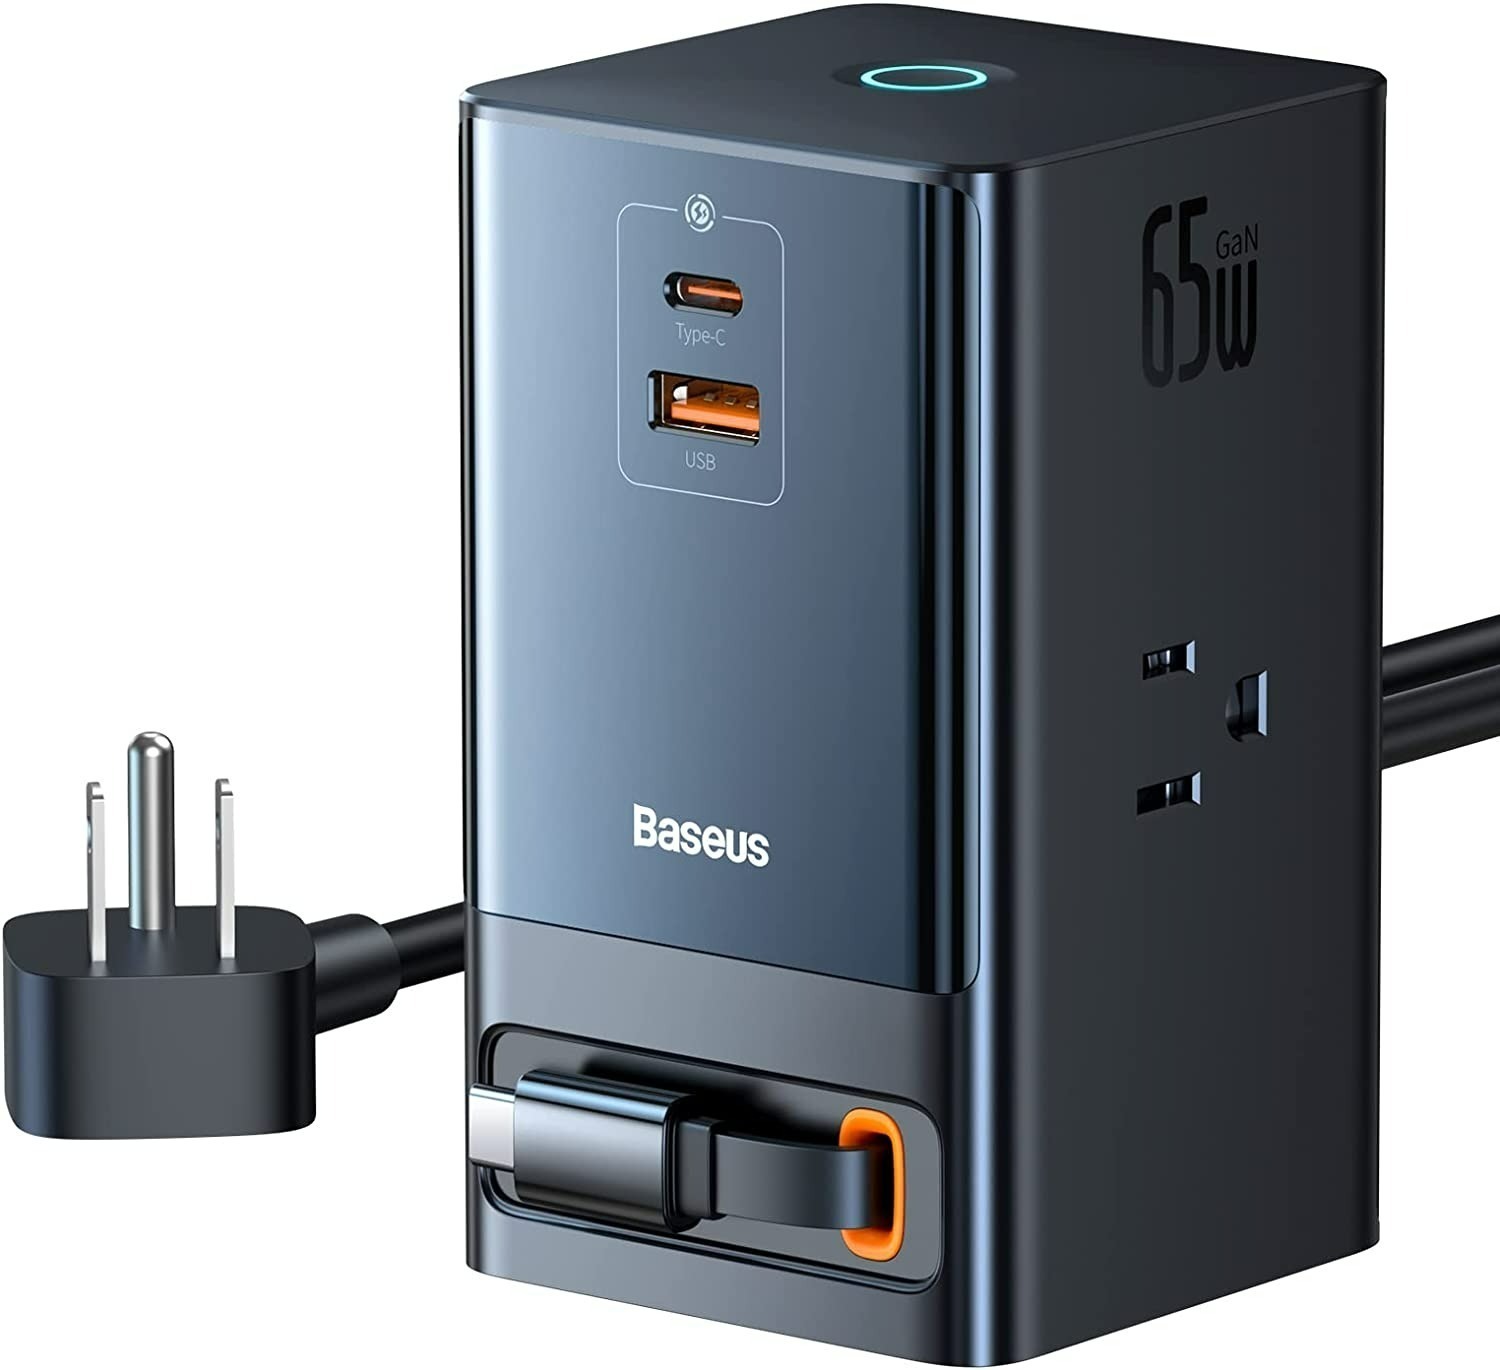 Baseus PowerCombo Tower 65W with Retractable USB-C Cable $48 + Free Shipping